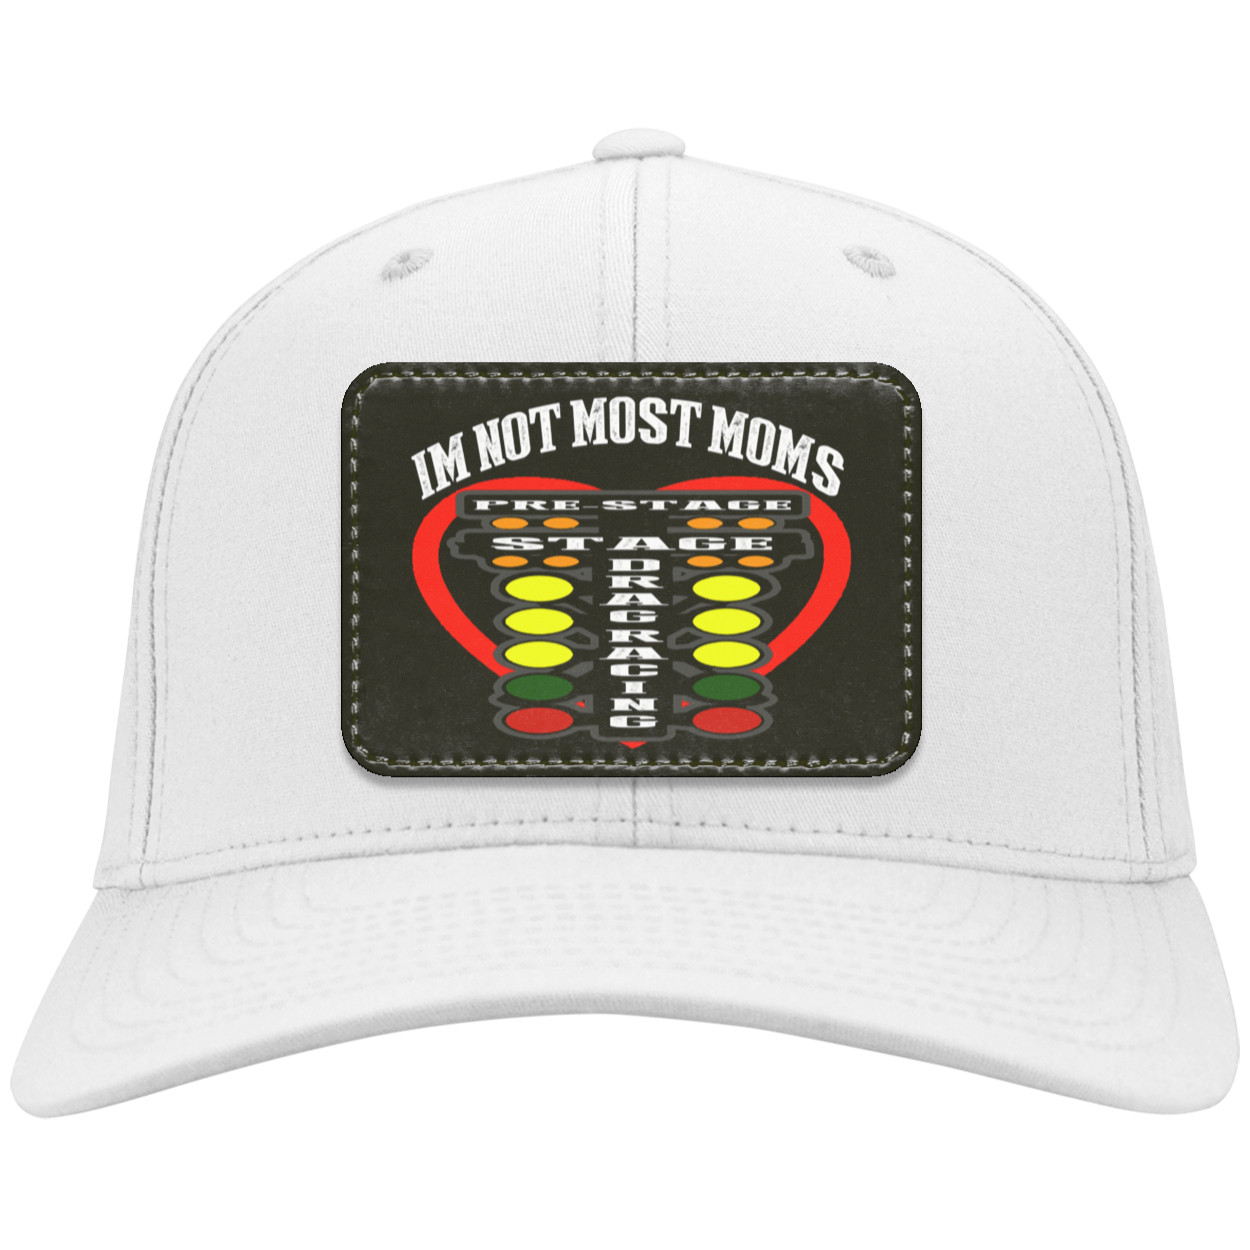 I'm Not Most Moms Drag Racing Twill Cap - Patch